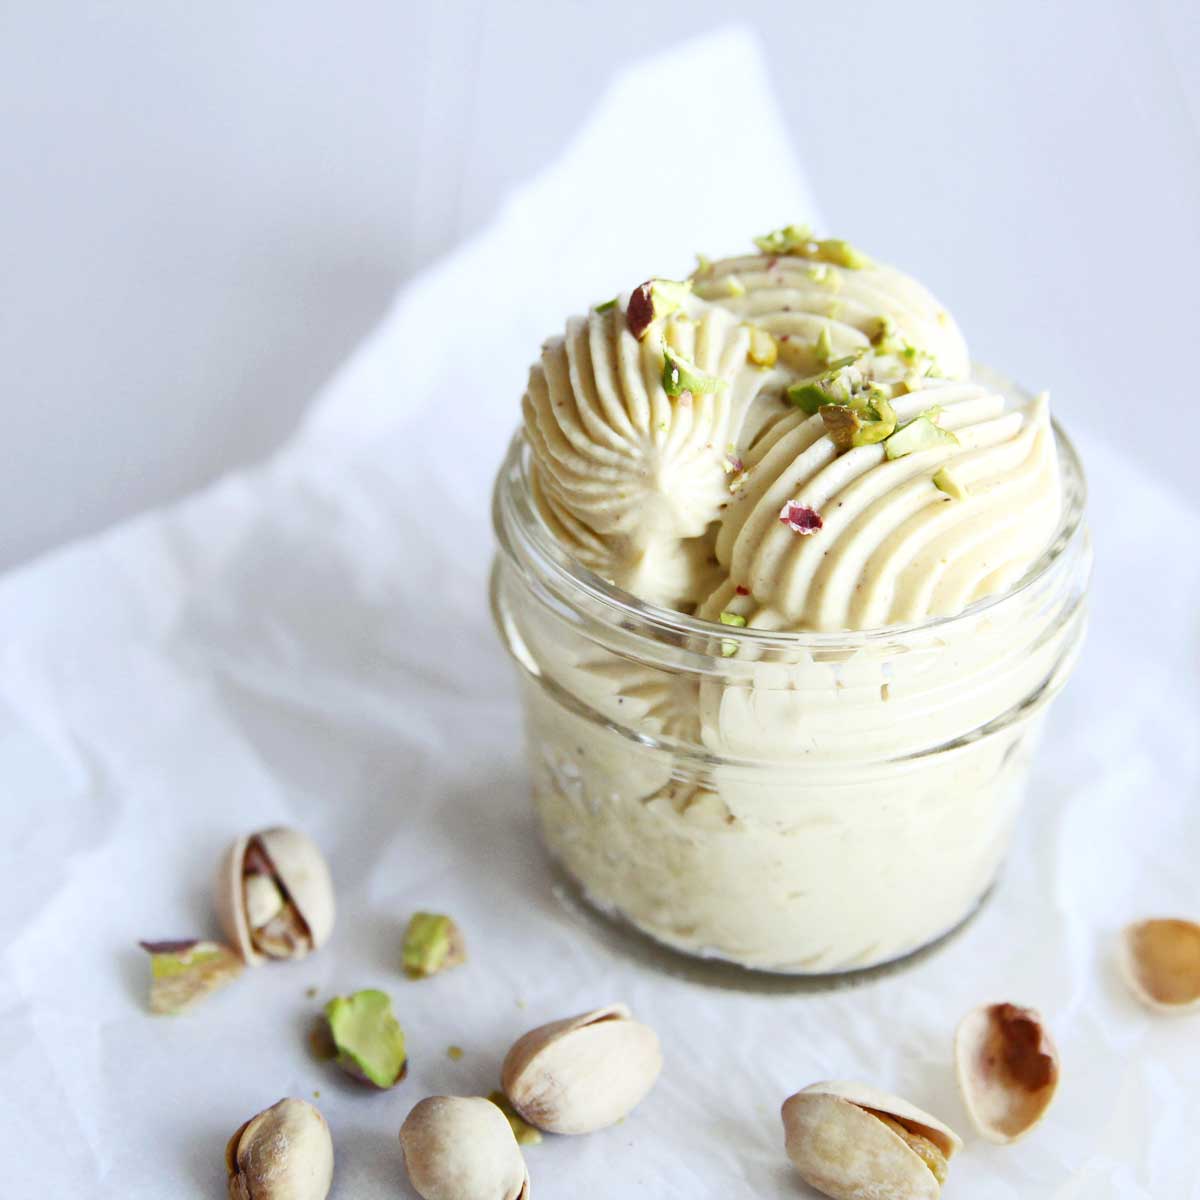 Low Carb Pistachio Whipped Cream (Stabilized with Cream Cheese)